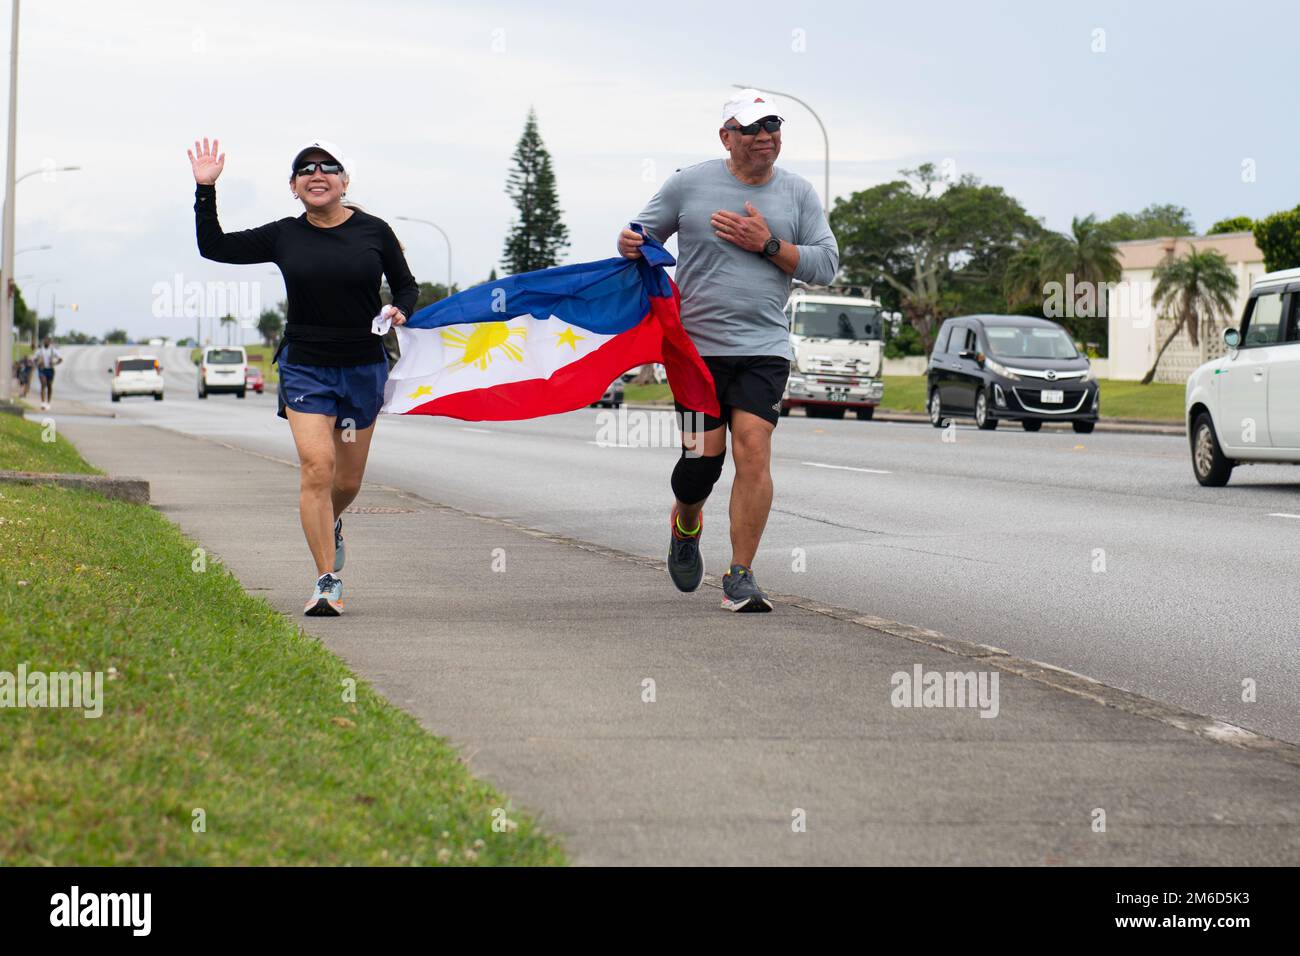 Runners cross the finish line displaying the Flag of the Philippines at the 9th Annual Memorial for the Bataan Death March at Kadena Air Base, Japan, April 23, 2022. The 8.5-mile run/ruck/walk was held to commemorate the American and Filipino servicemen who were marched nearly 70 miles to prison camps after surrendering at the Bataan Peninsula in April of 1942. Stock Photo